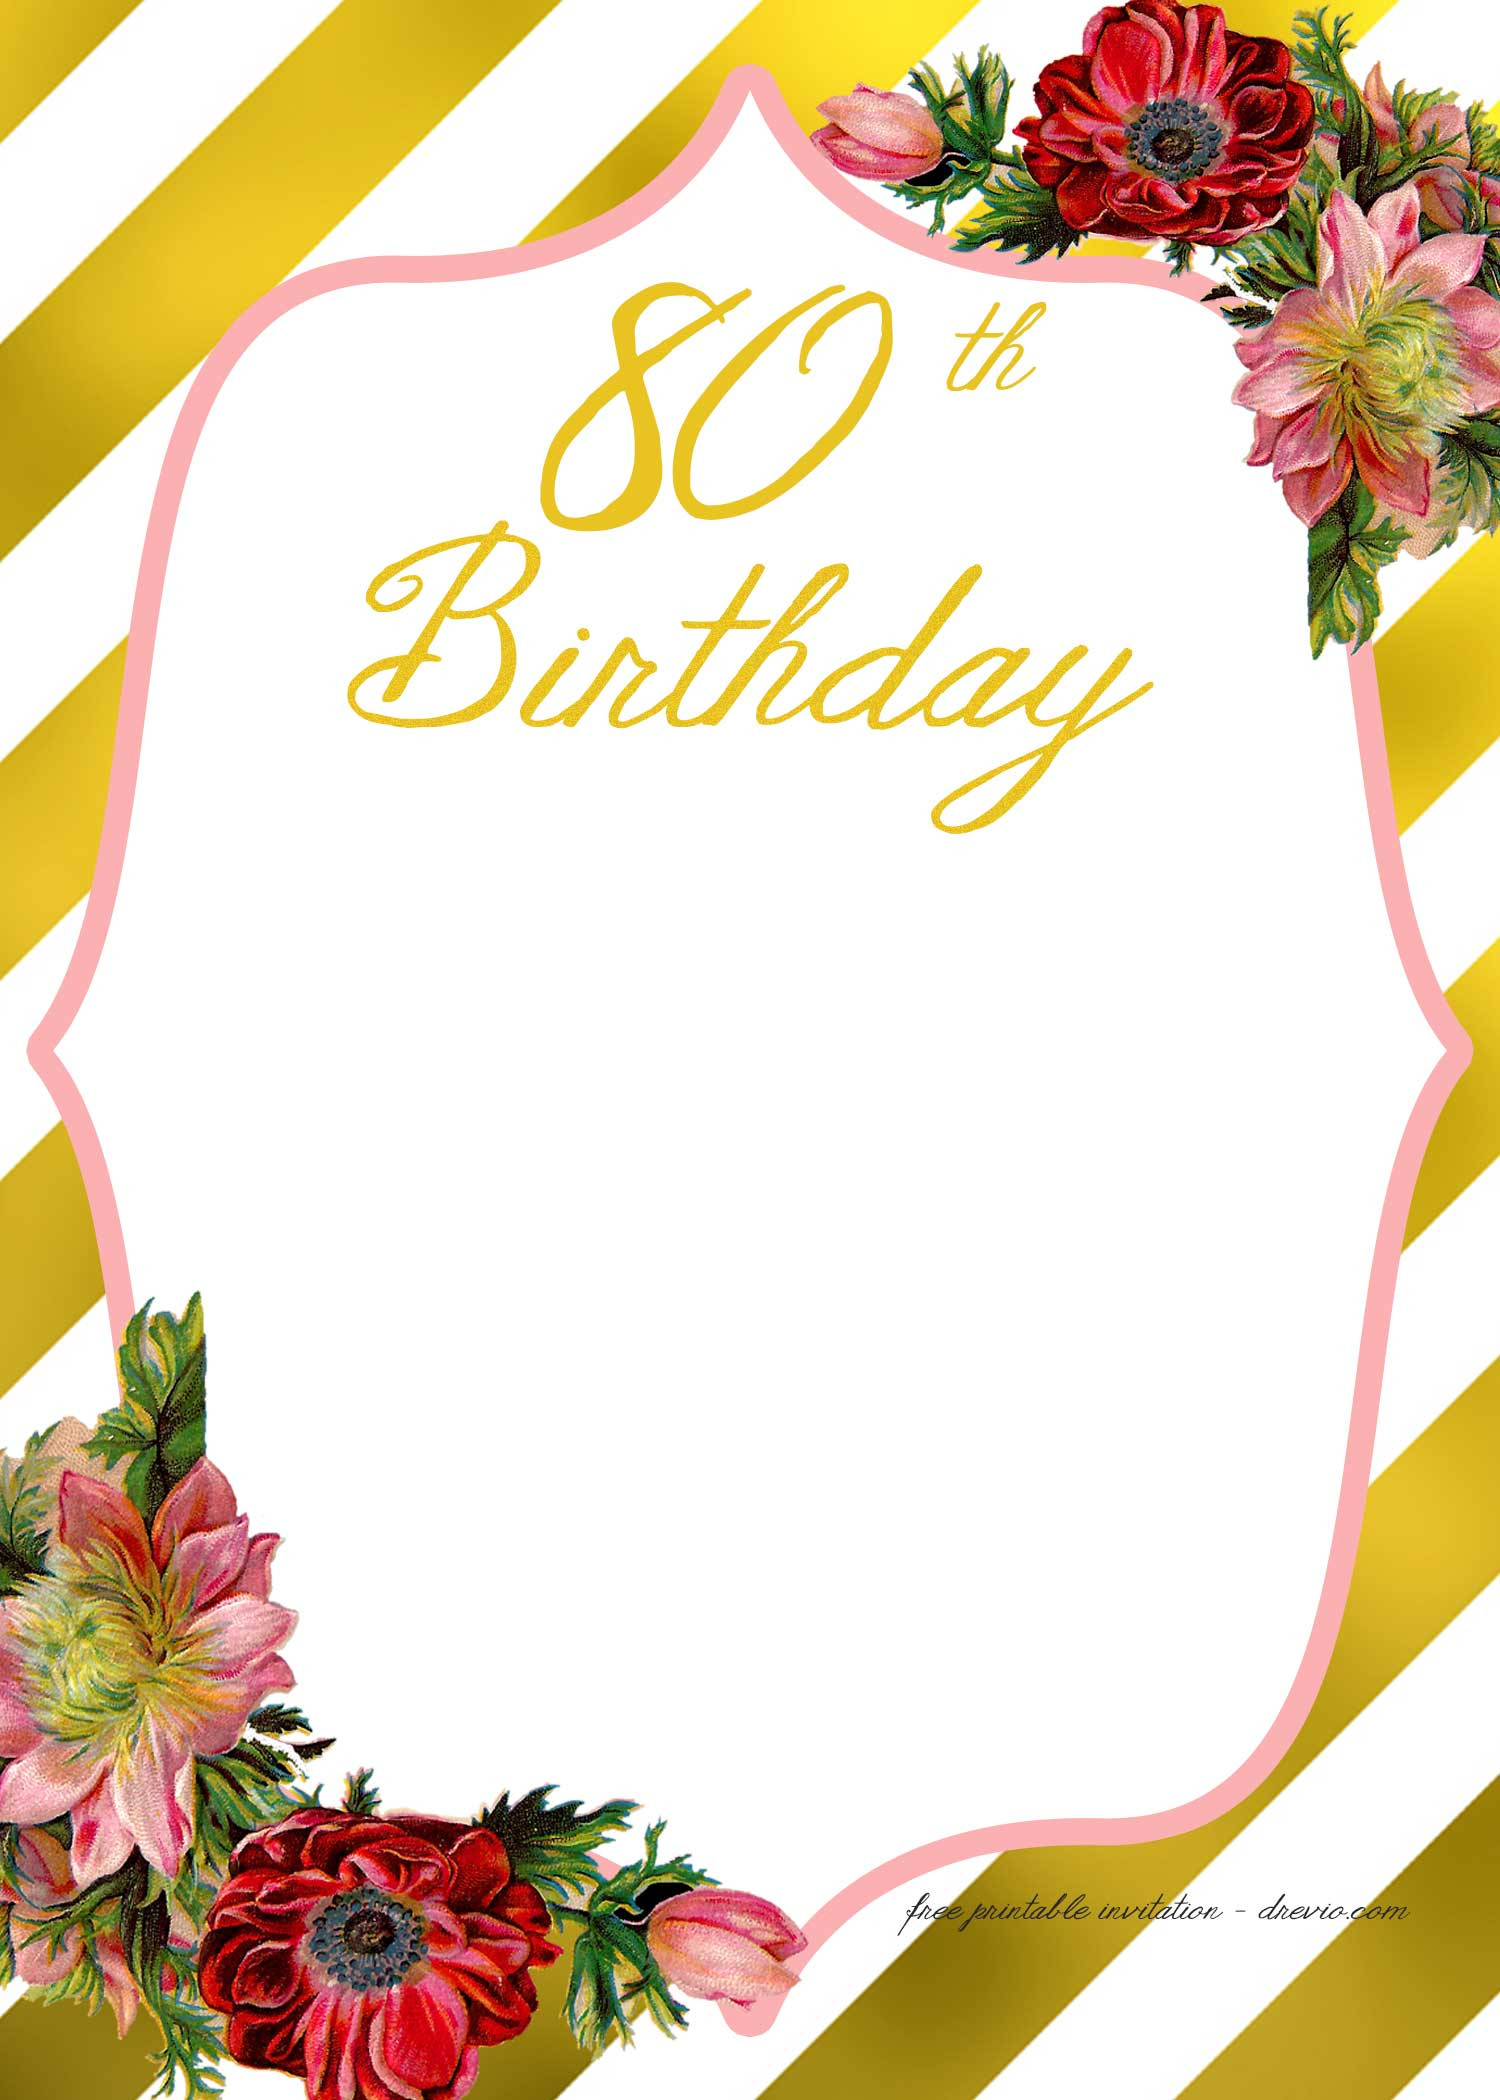 Template For Birthday Invitation
 FREE Printable Adult Birthday Invitation Template – FREE